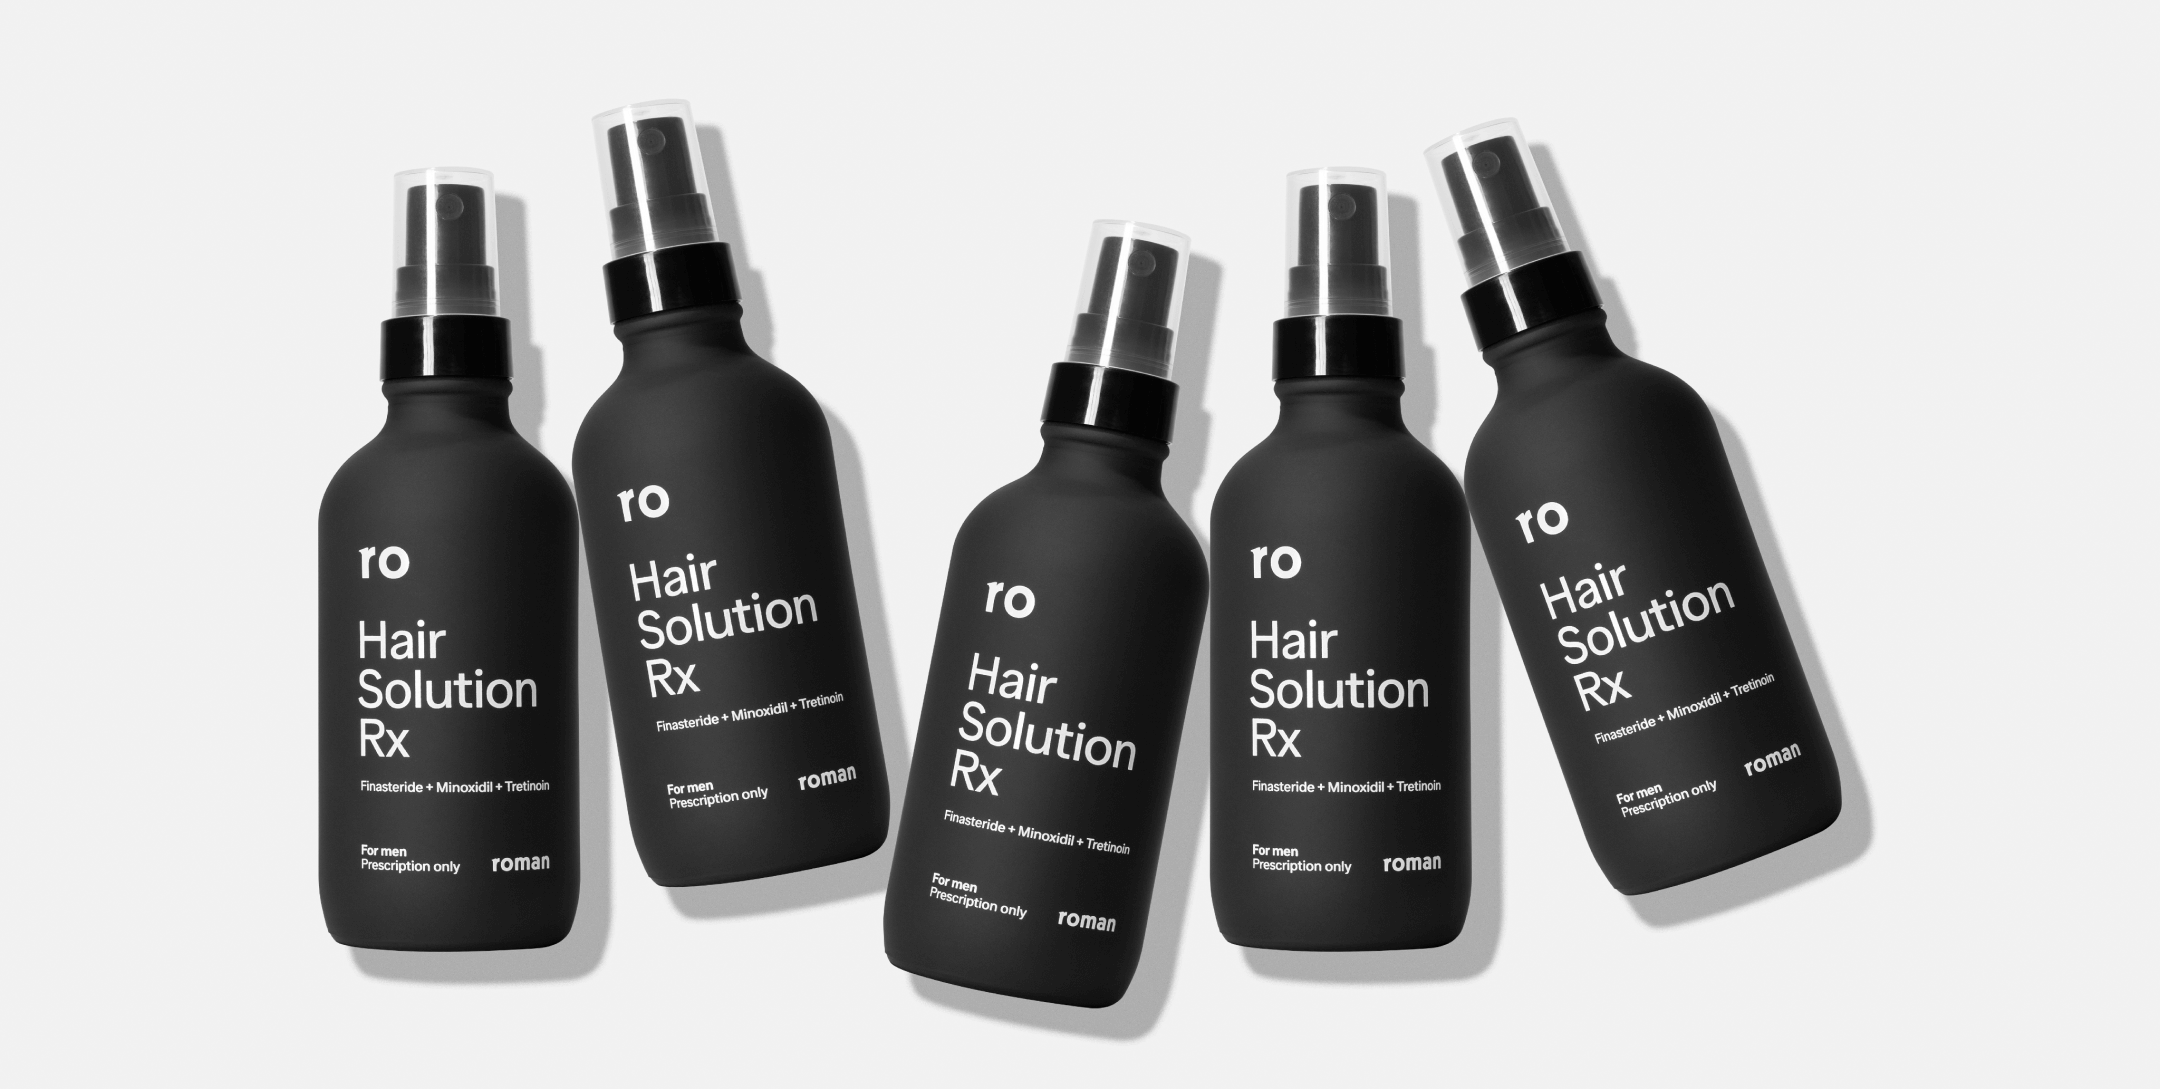 Ro, Roman, Hair Solution Rx, Hair, Hair Care, Primary Packaging, Packaging, Component, Spray Bottle